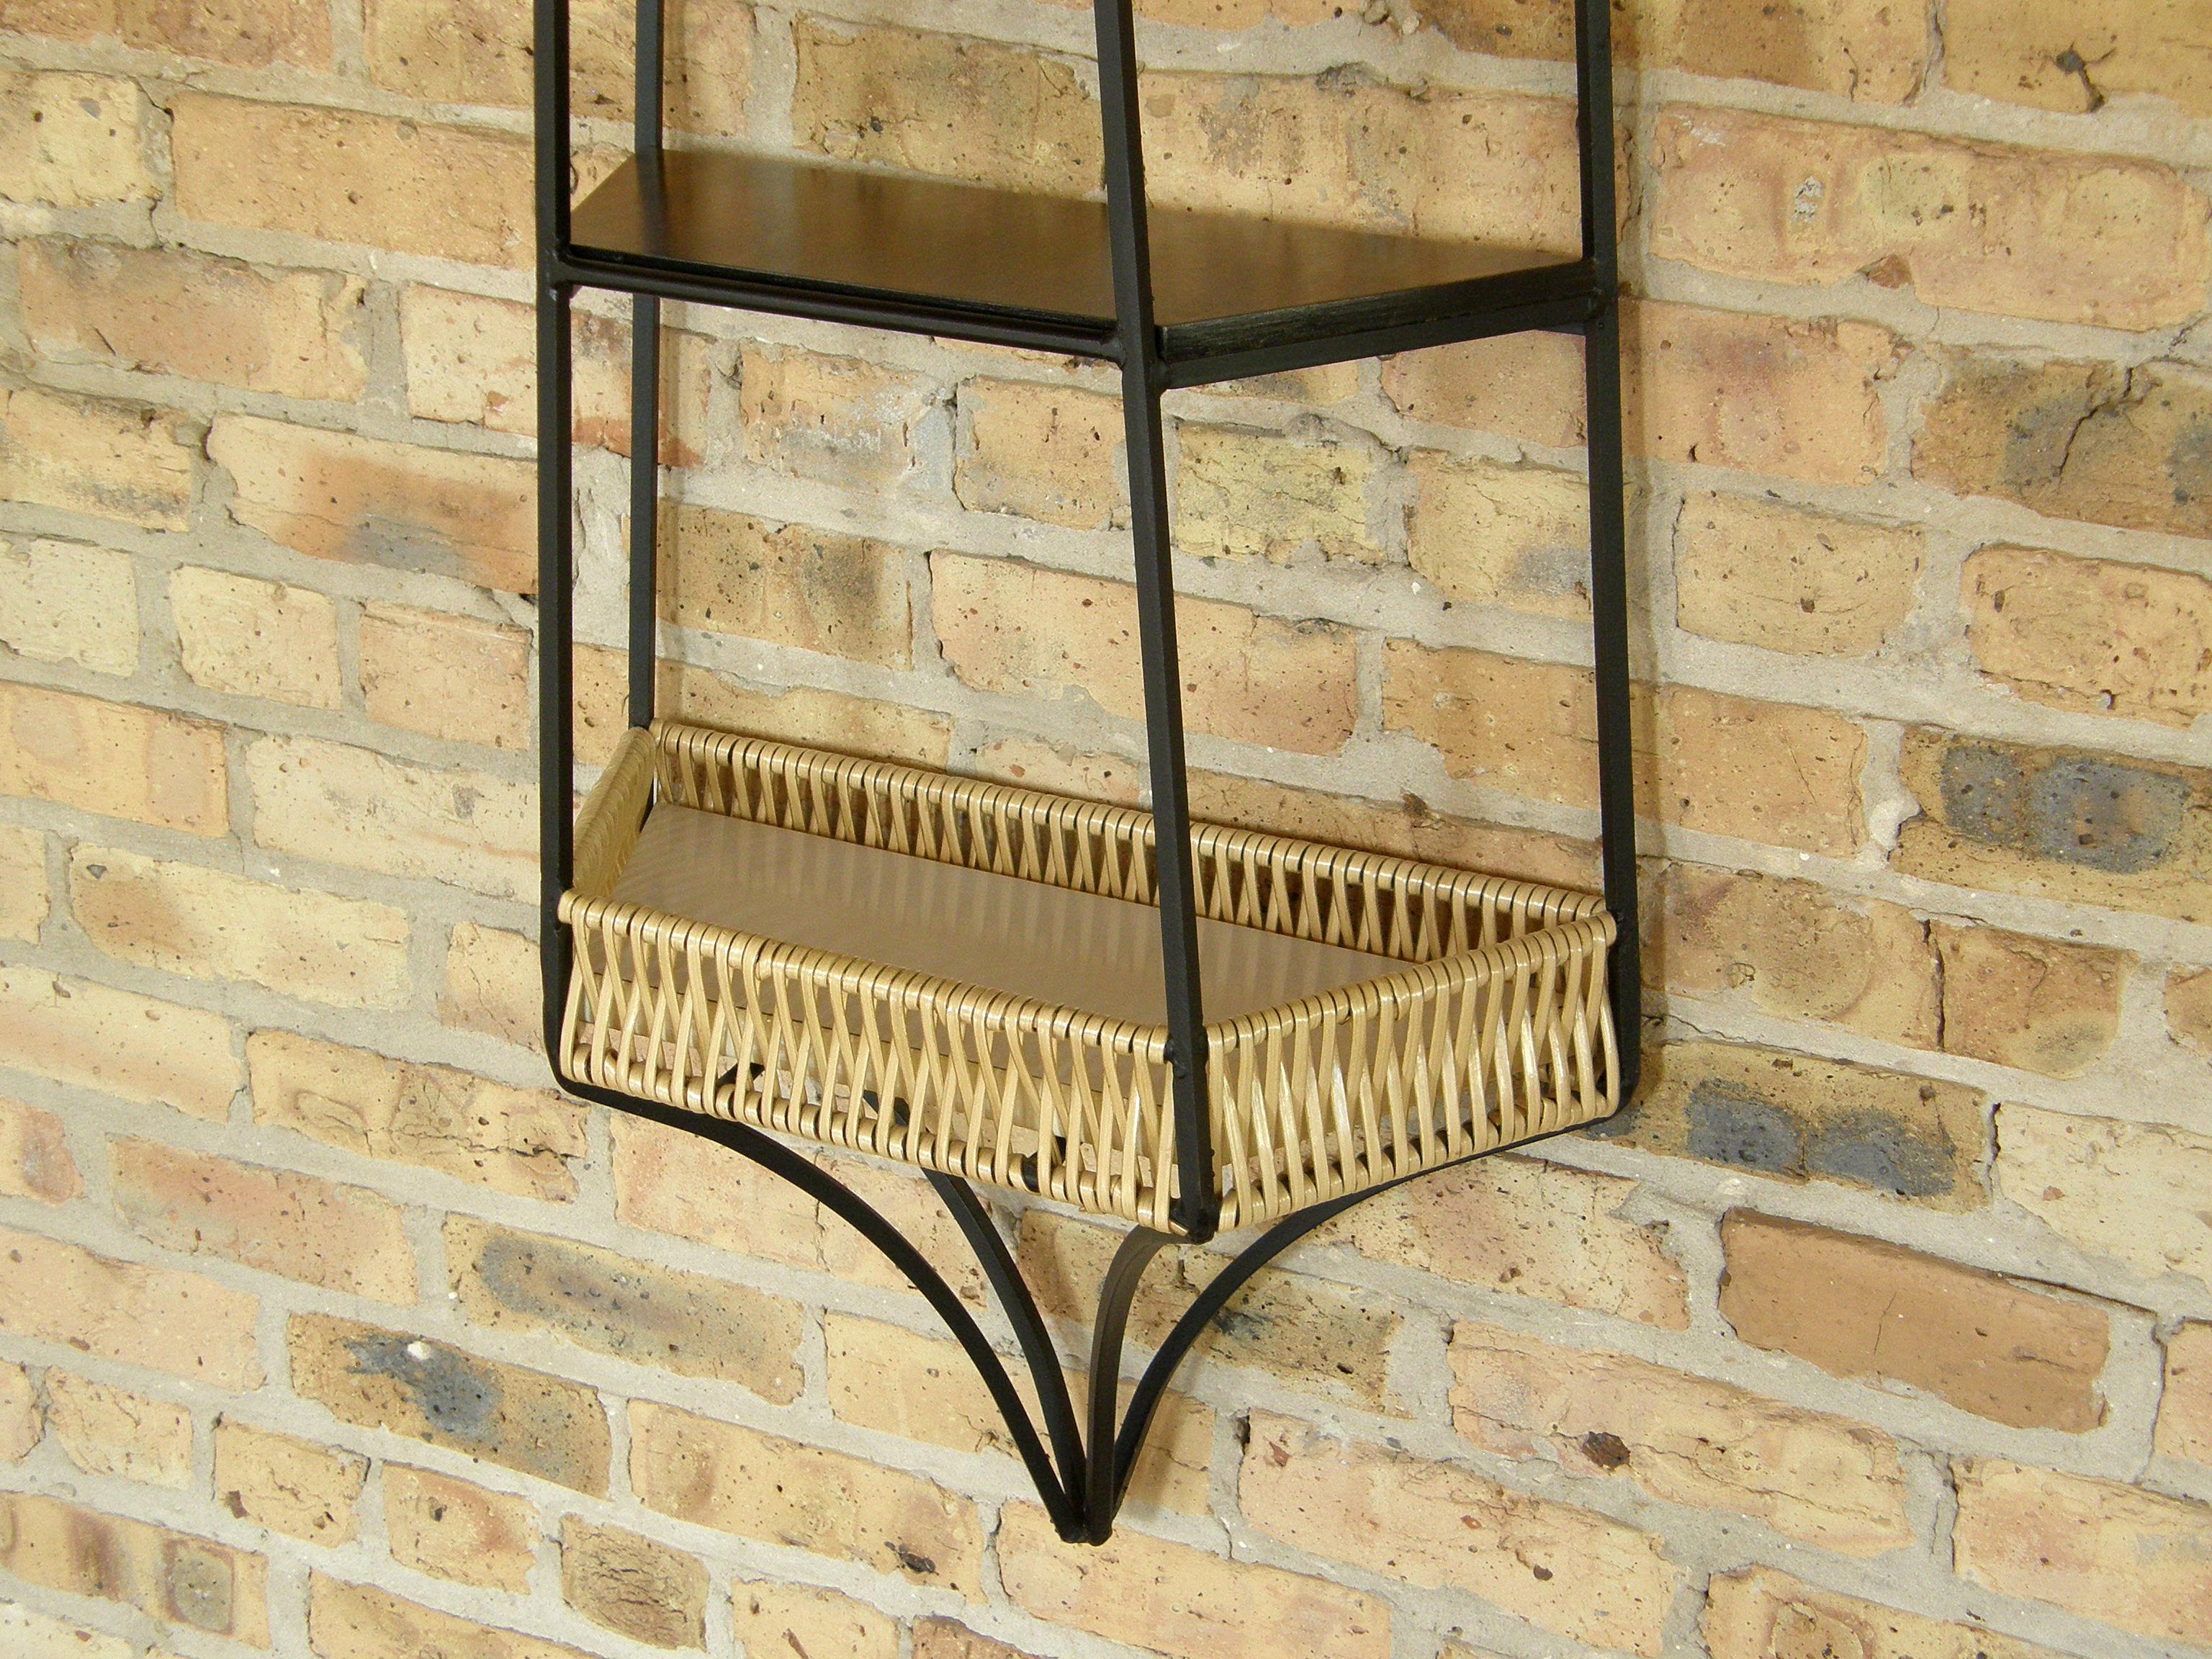 Wicker Arthur Umanoff Wall Mounted Shelf Unit for Shaver Howard with Wrought Iron Frame